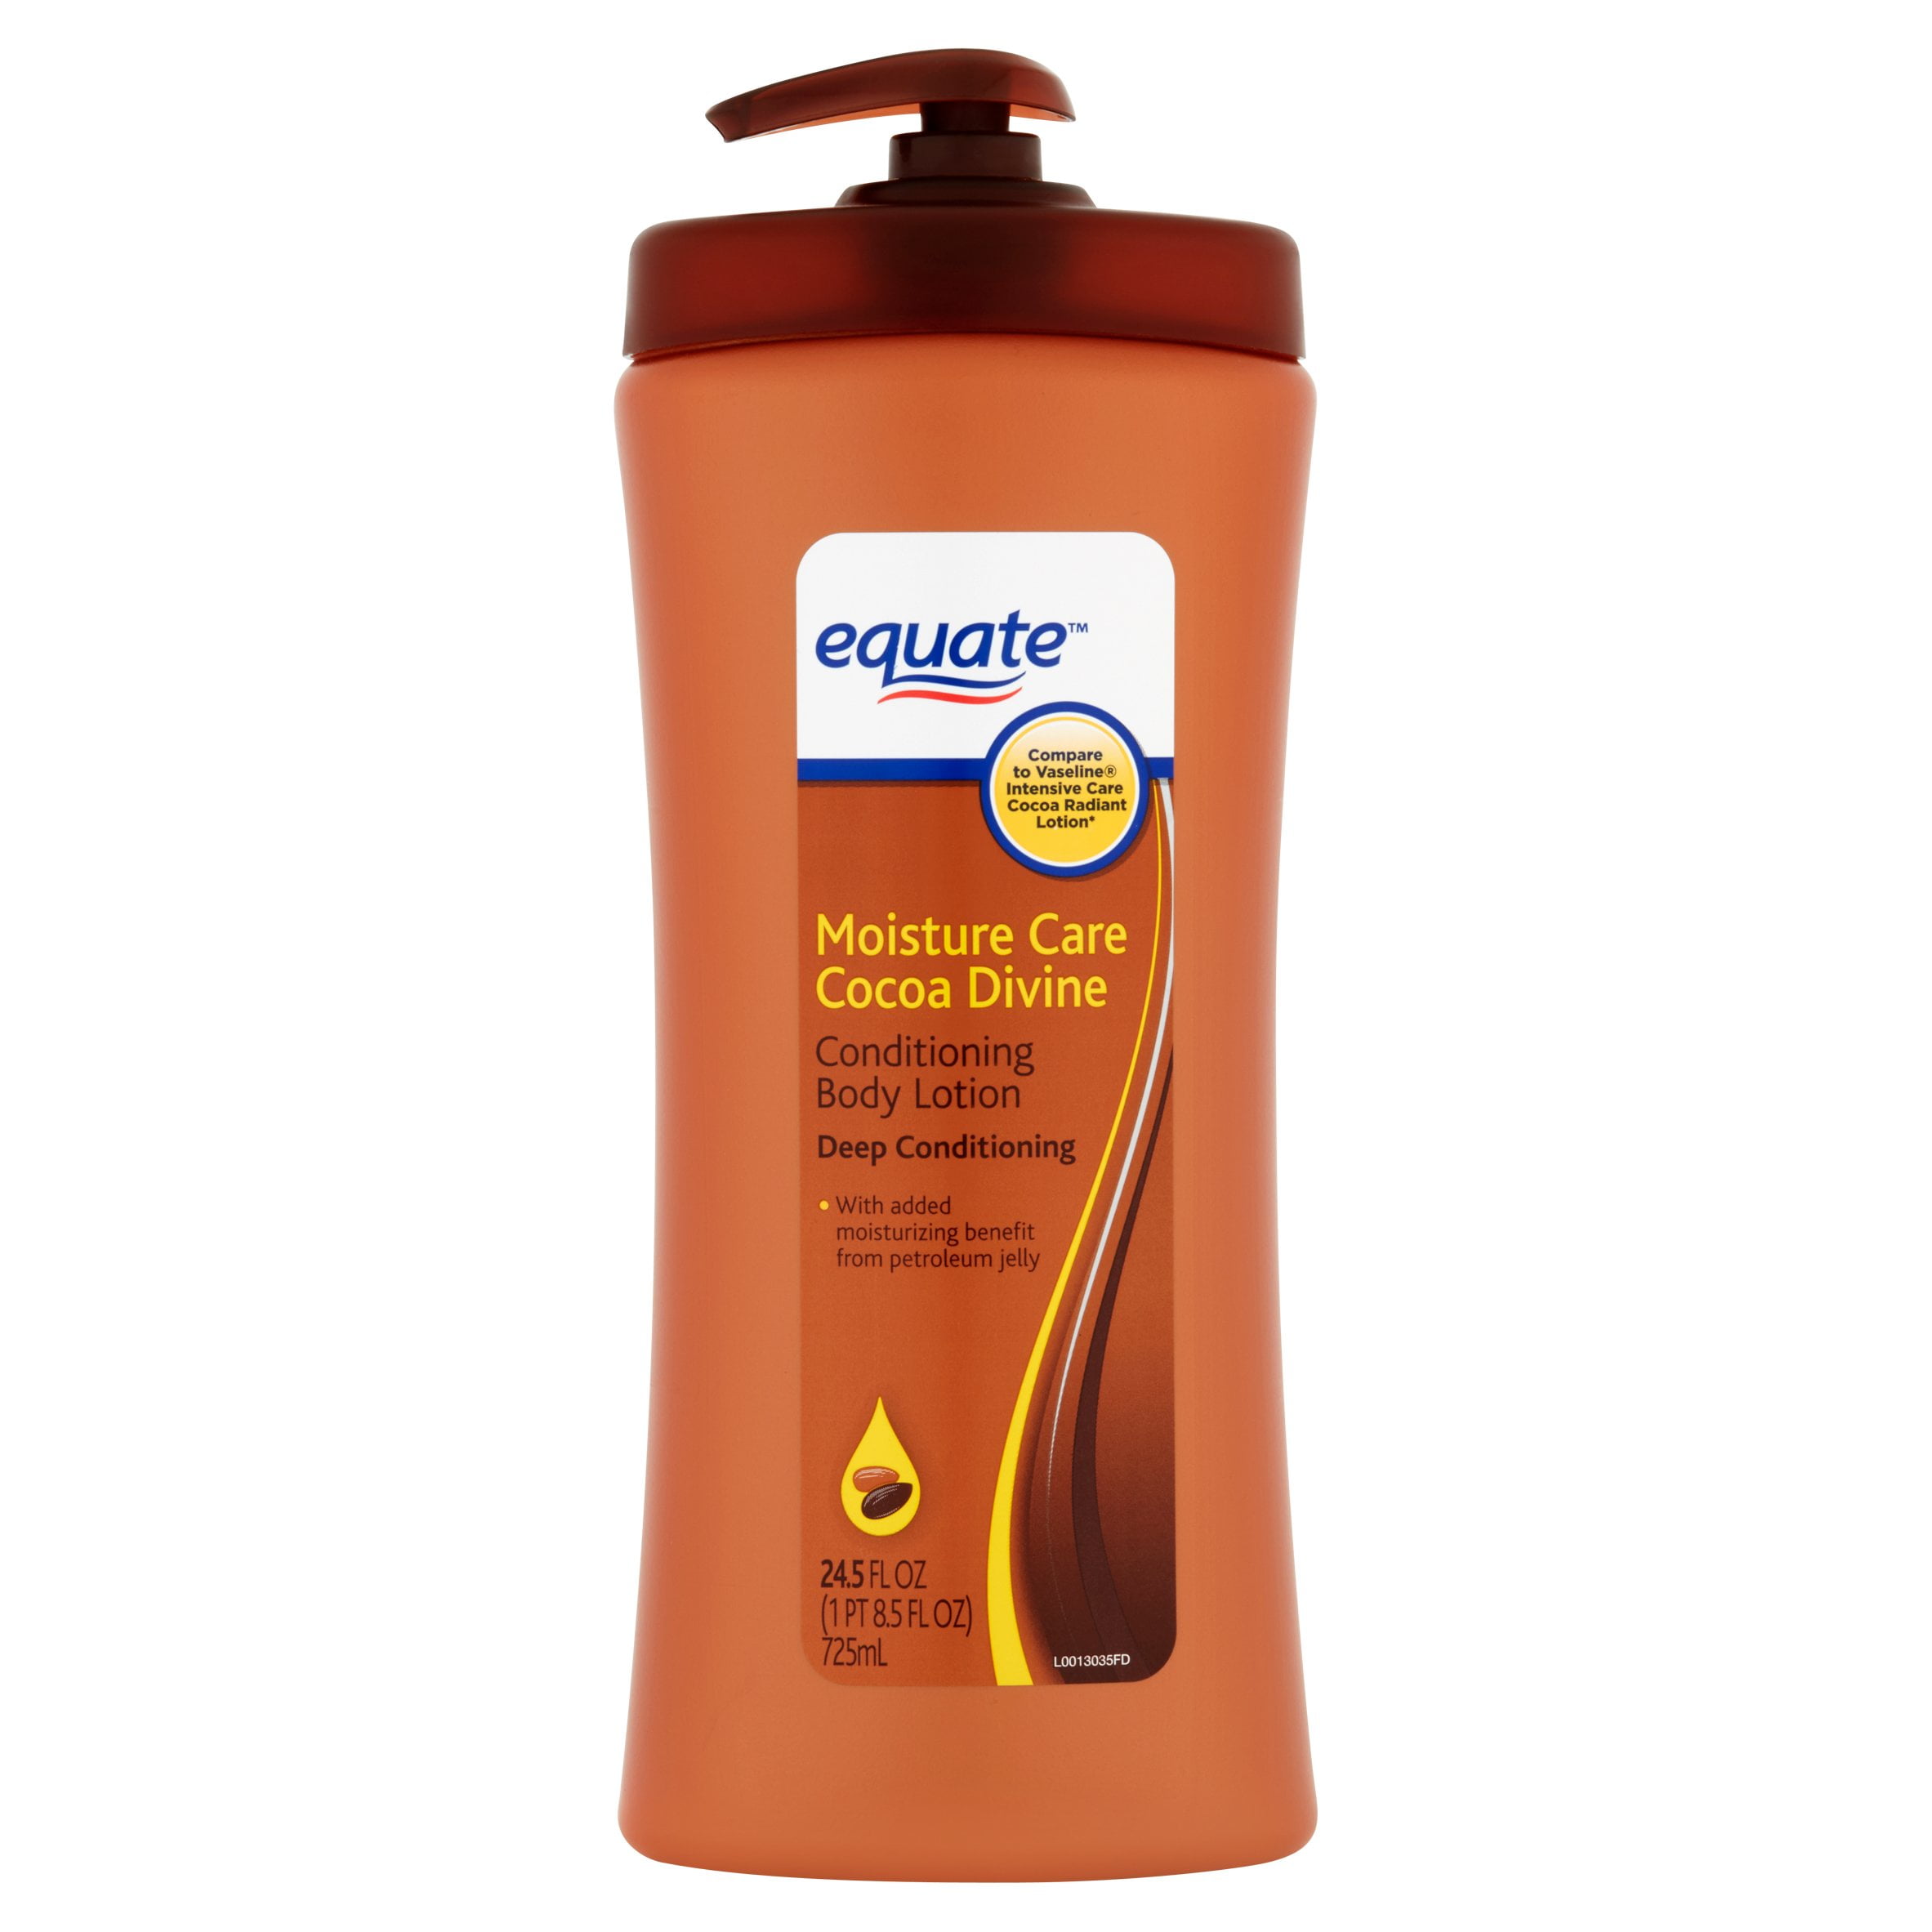 Buy Equate Cocoa Butter Conditioning Body Lotion, 24.5 Oz at Walmart.com. 